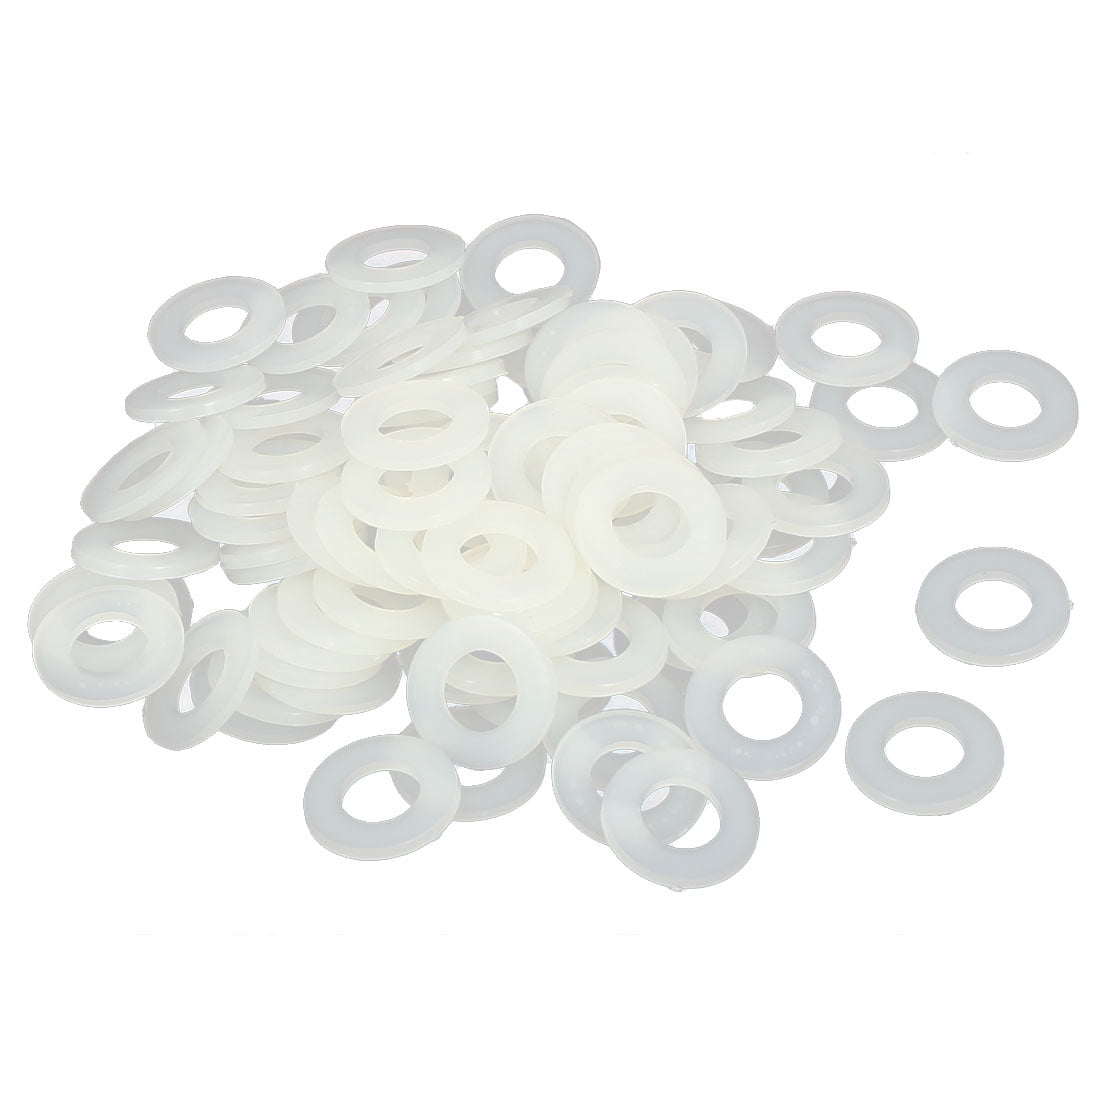 4mm WHITE NYLON PLASTIC WASHER SPACERS TO SUIT M4 SCREWS & BOLTS PICK A PACK 